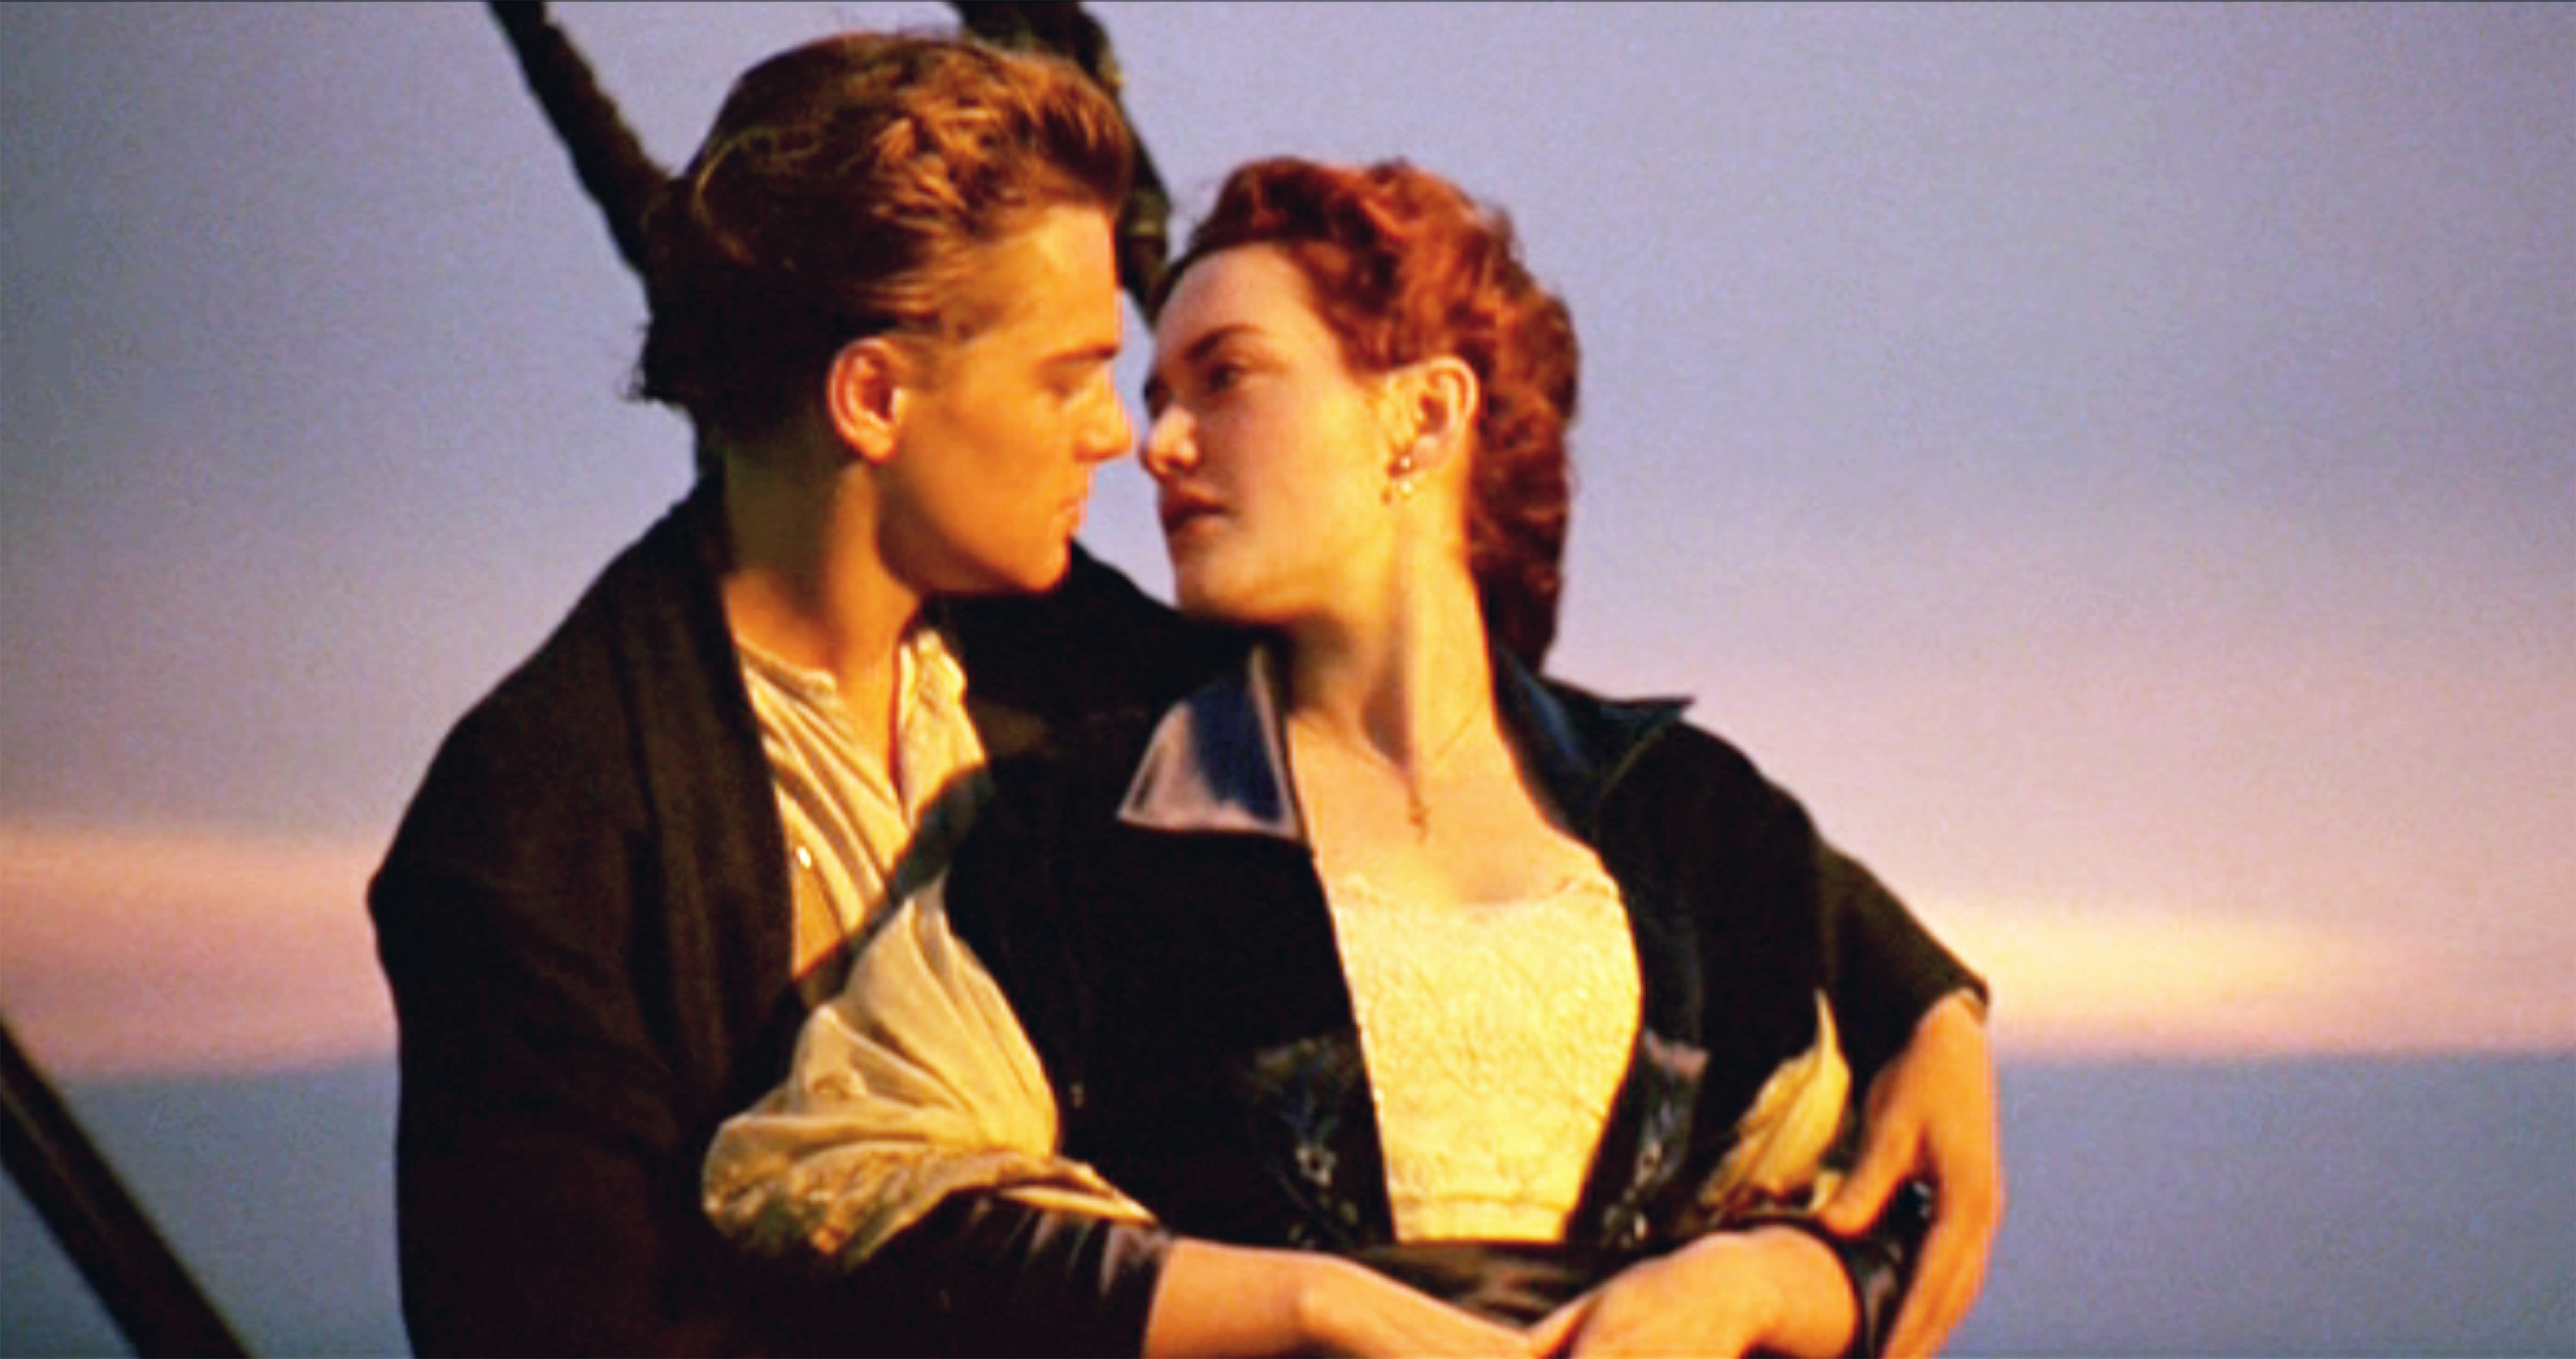 Leonardo DiCaprio as Jack and Kate Winslet as Rose stand at the front of the ship in &quot;Titanic&quot;